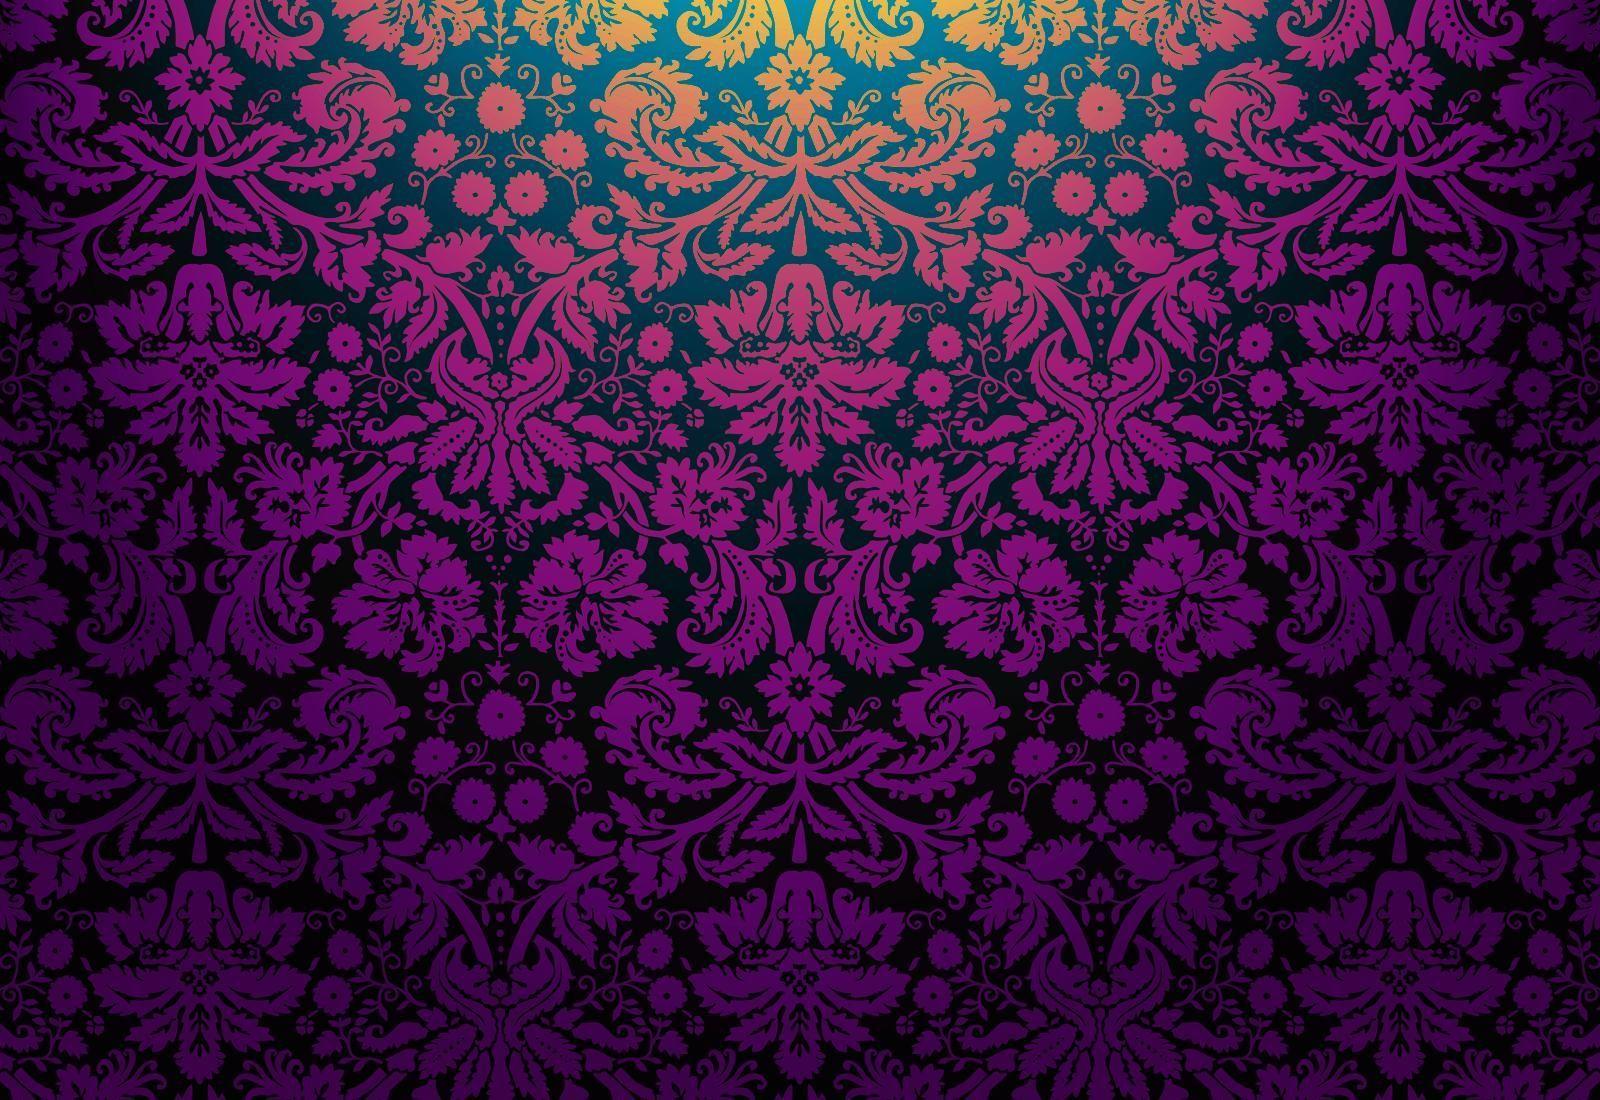 purple and black damask pattern facebook cover. Business banners